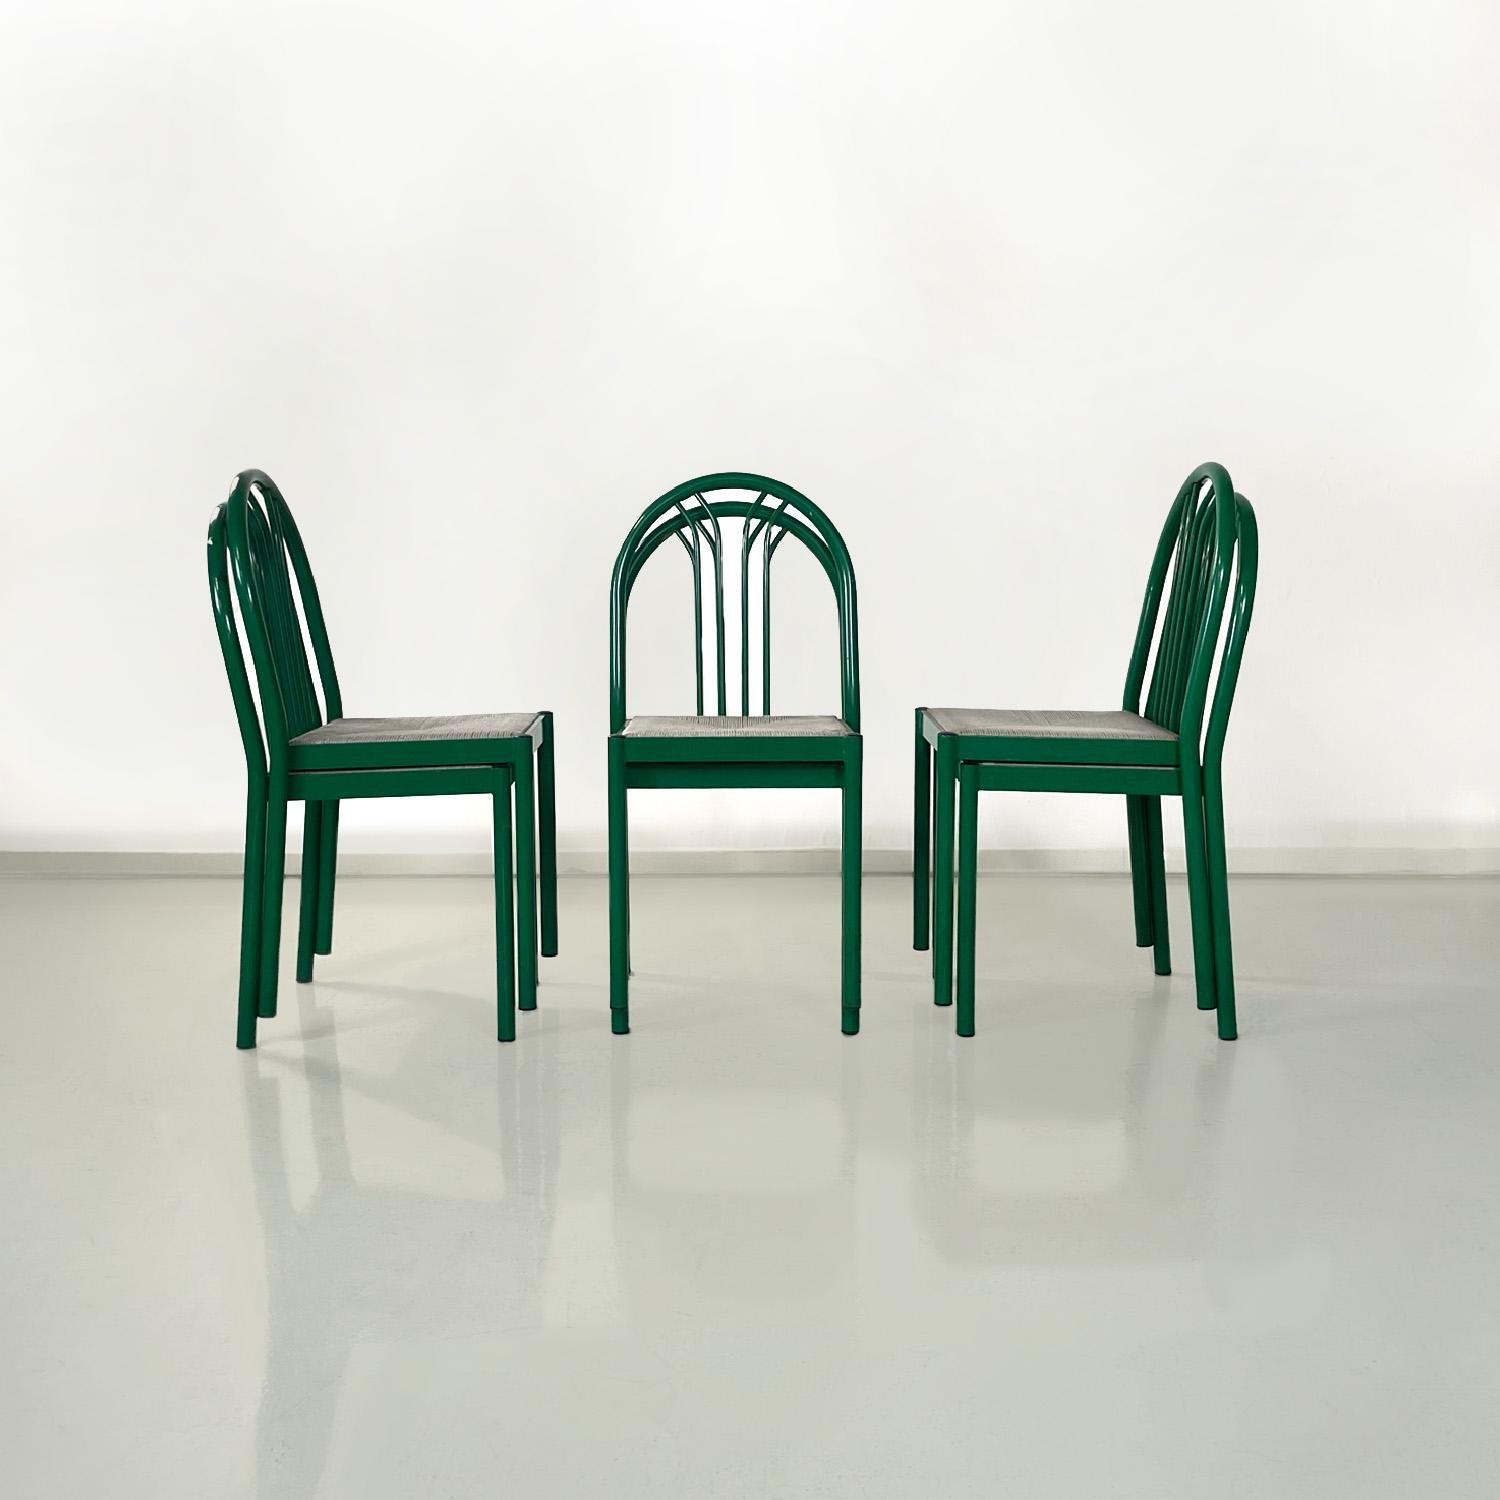 Italian modern green tubular metal and grey straw stackable chairs, 1980s
Set of six chairs with metal and straw structure. The structure is in green painted metal tubing, there are four metal rods placed vertically that make up the backrest. The